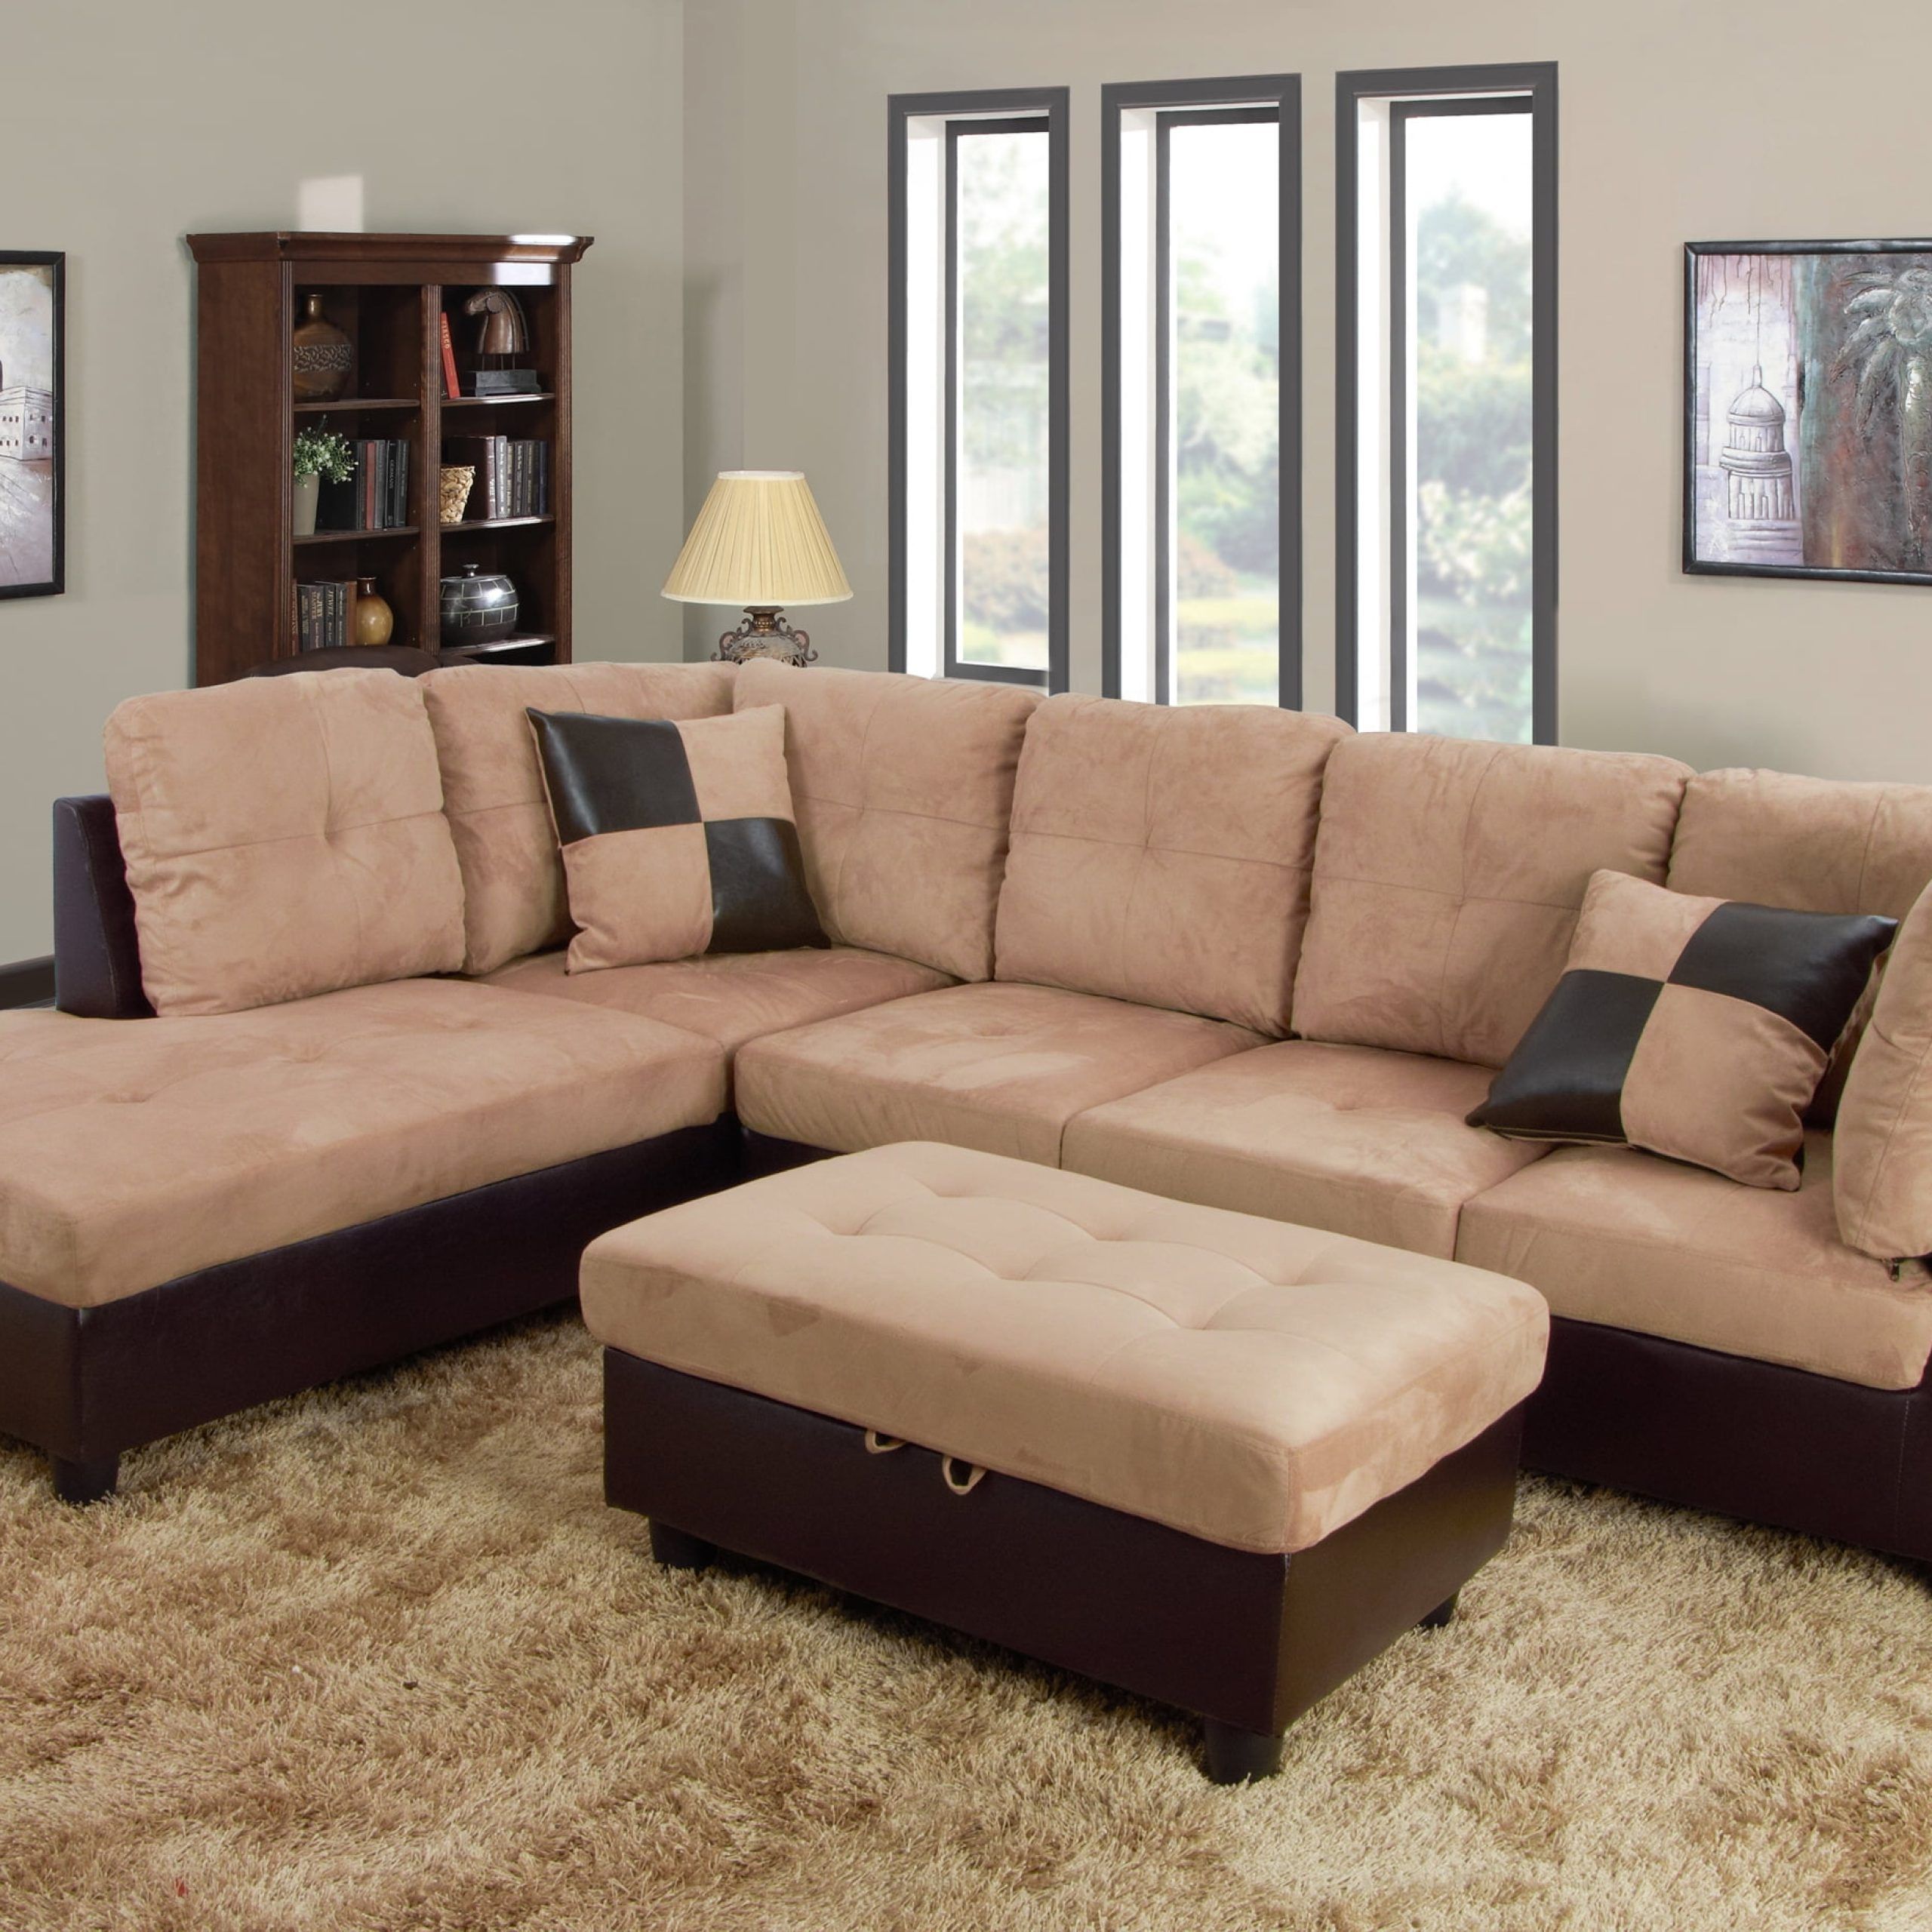 Aycp Furniture 3pcs L Shape Sectional Sofa Set, Left Hand Facing Chaise Inside Small L Shaped Sectional Sofas In Beige (View 20 of 21)